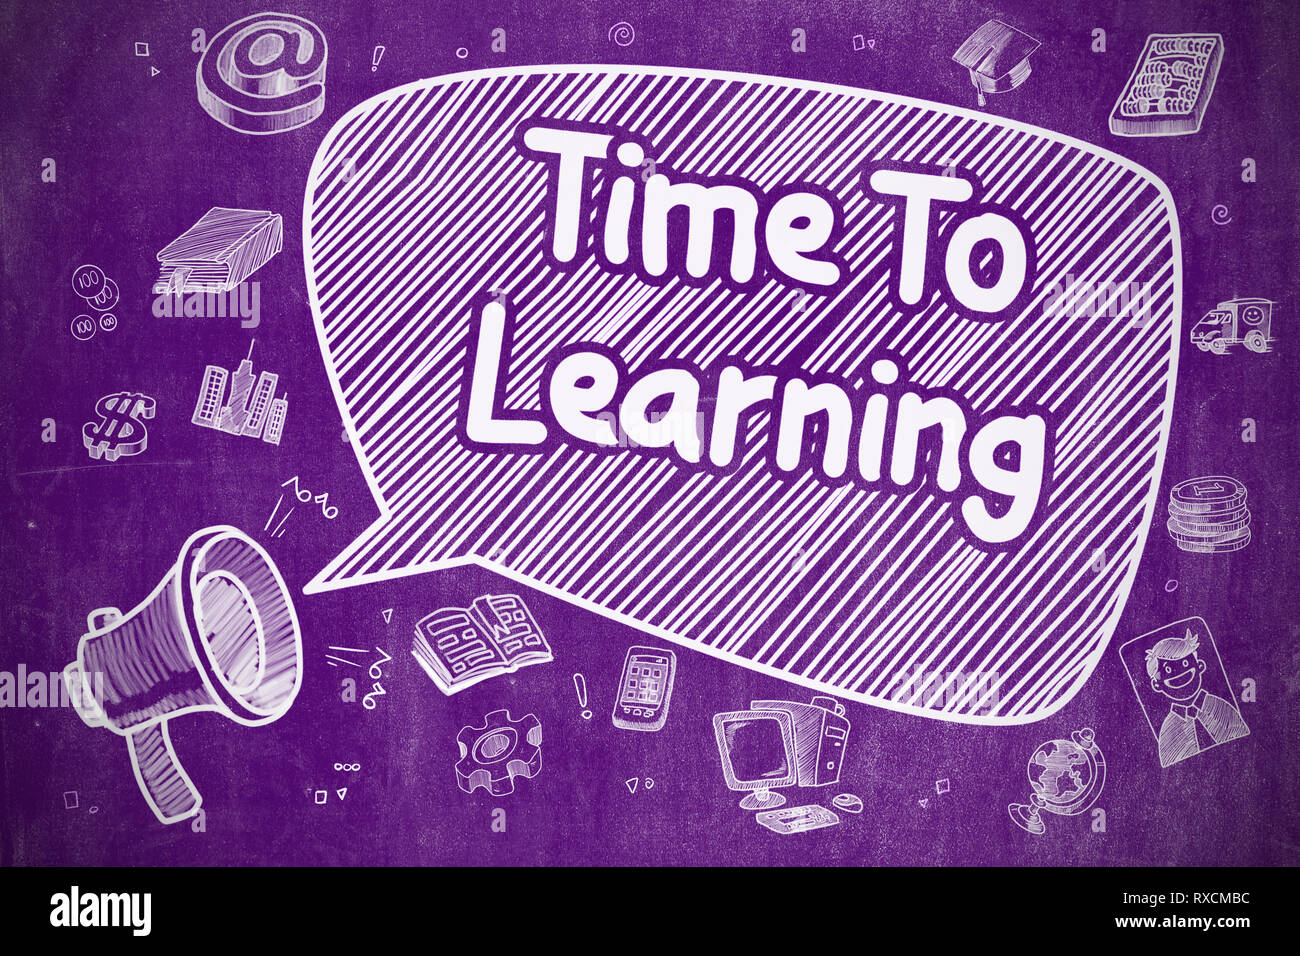 Time To Learning - Doodle Illustration on Purple Chalkboard. Stock Photo